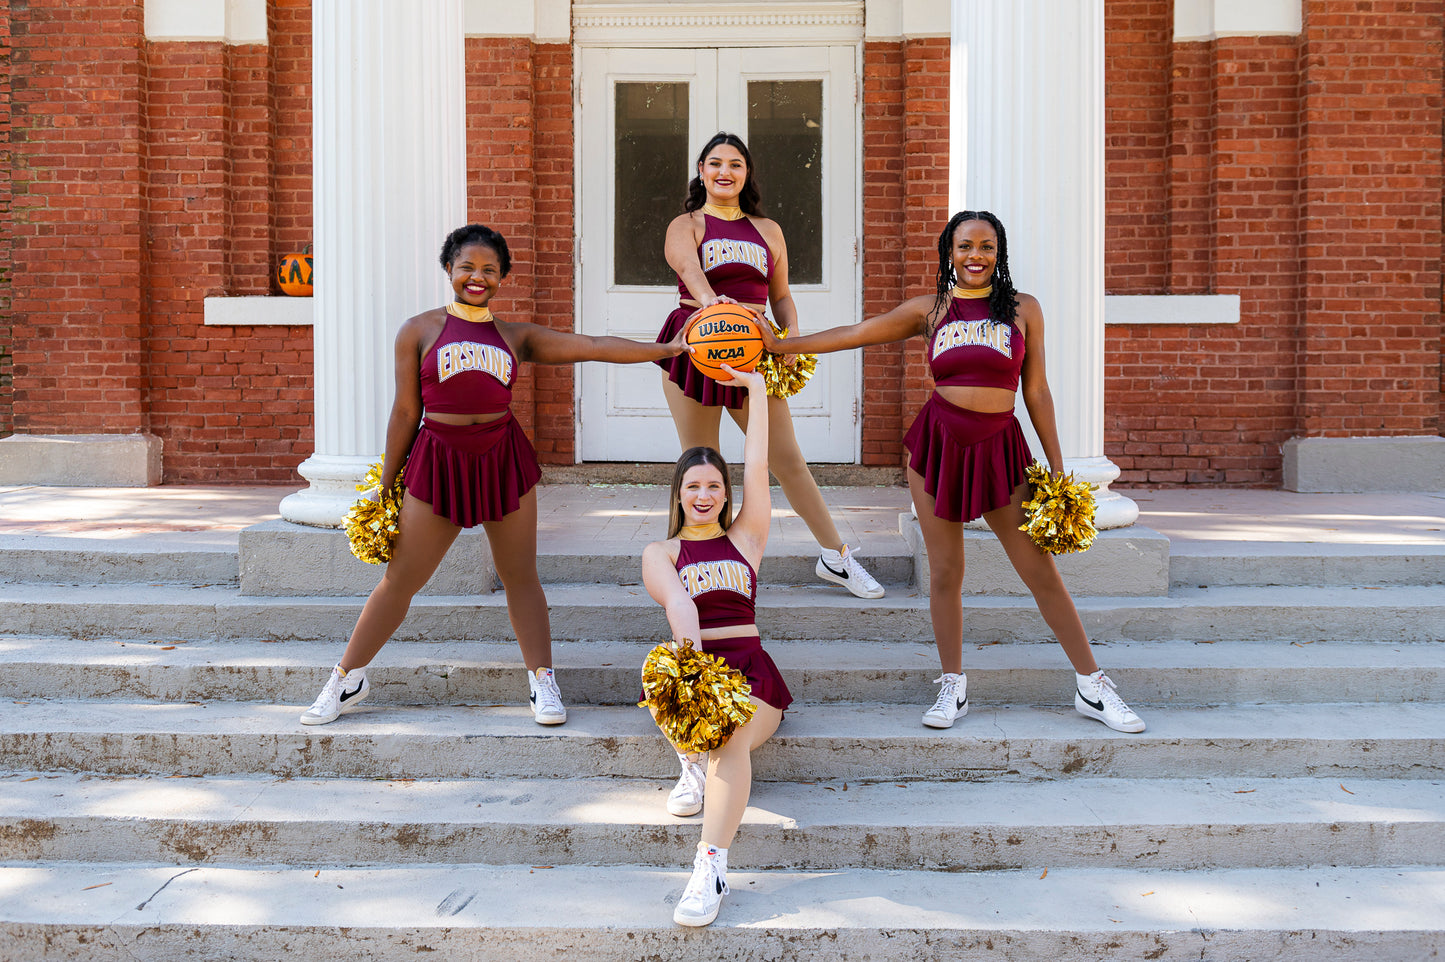 Cheerleaders pose with a basketball